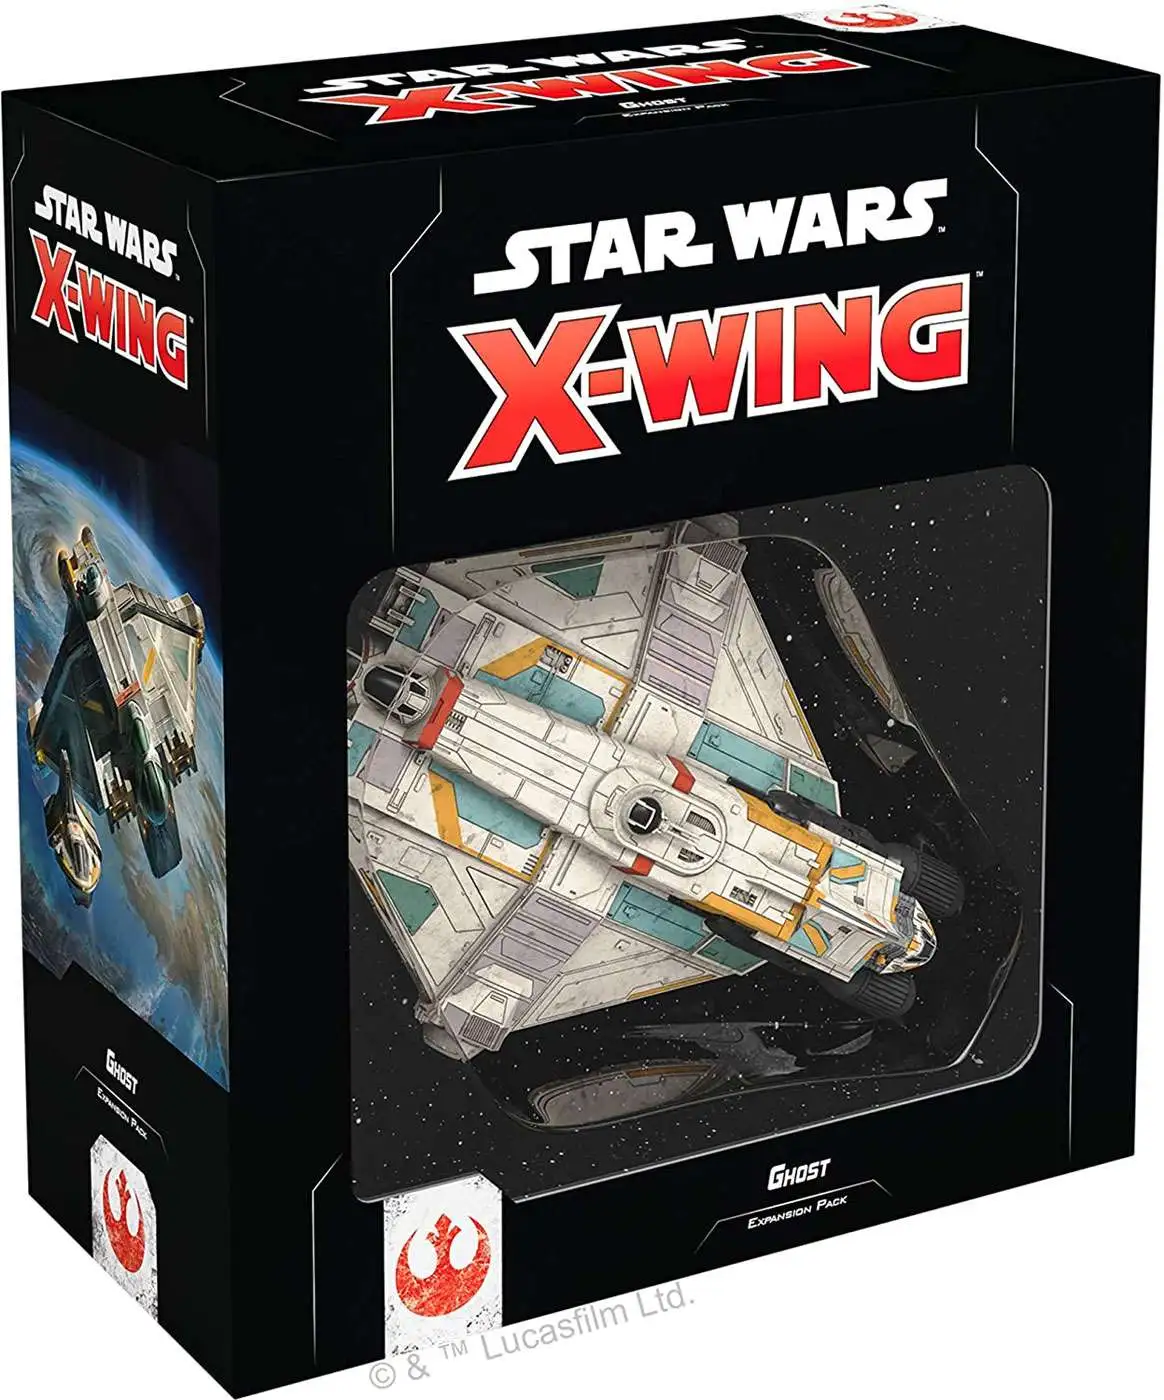 ITALIAN GU464 Star Wars X-WING Spettro Ghost Expansion Pack Miniature Game 